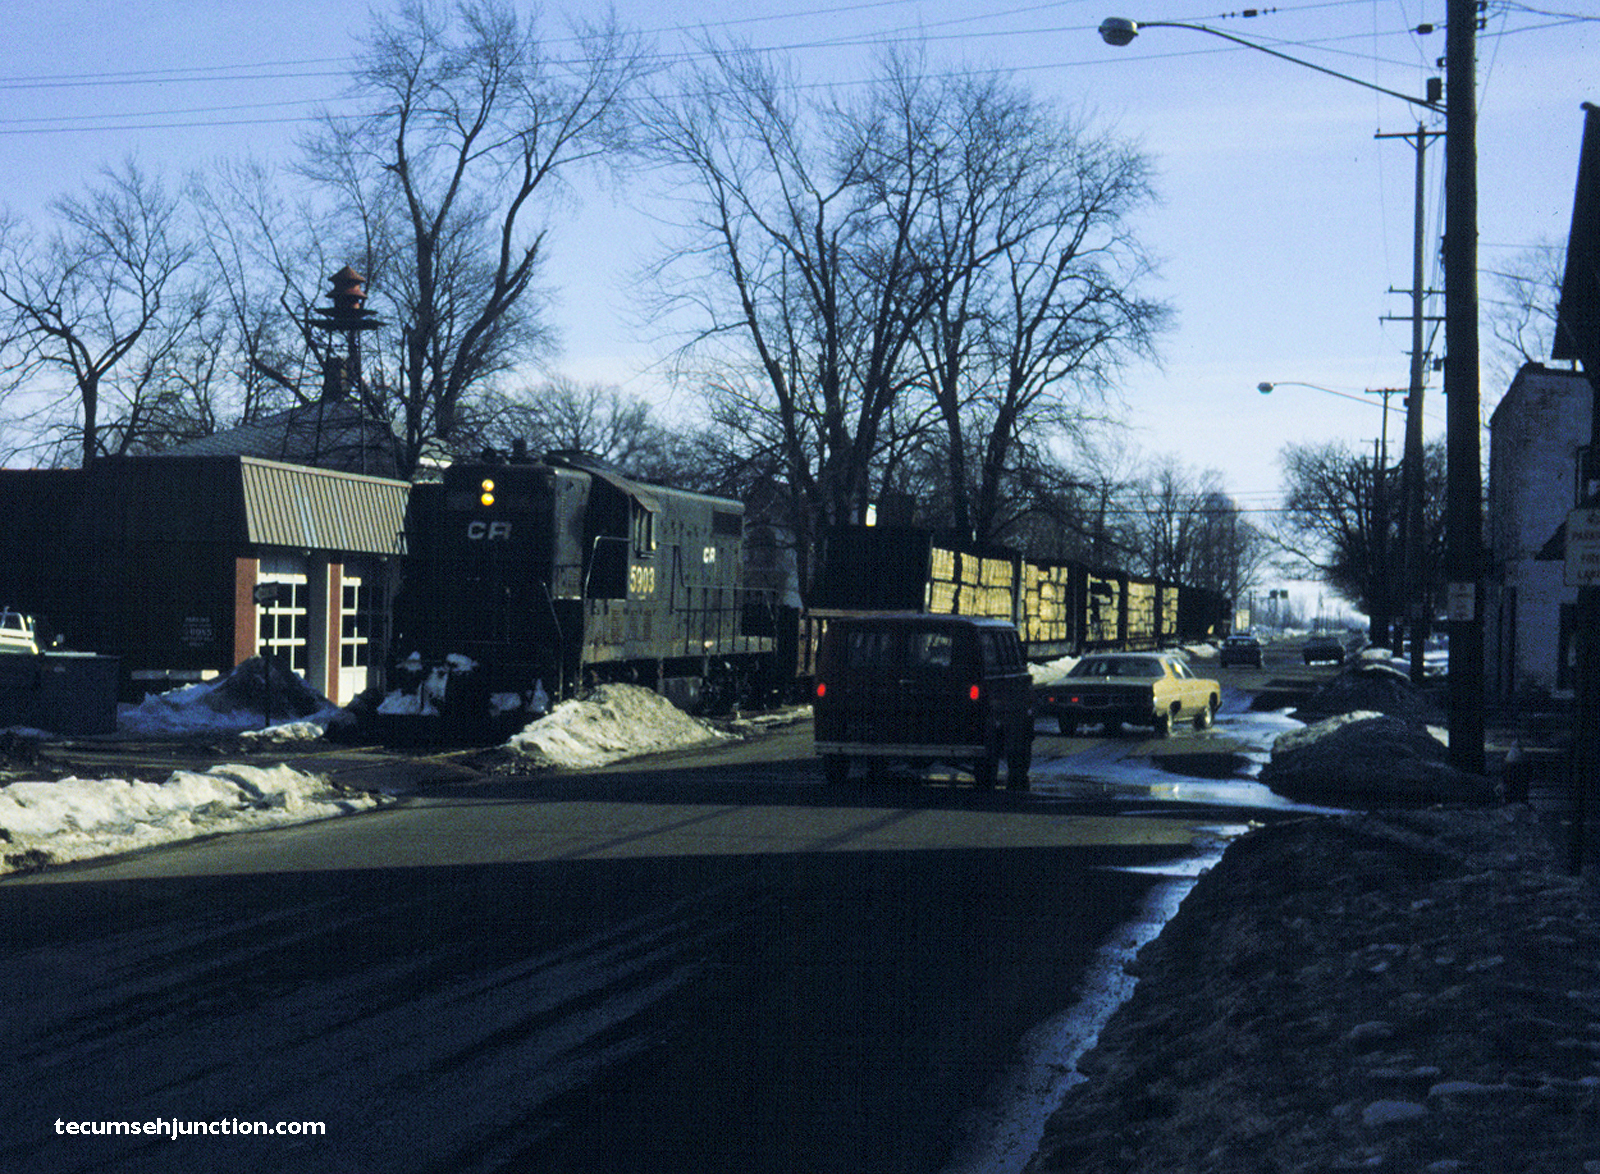 The train moves northward along S. Evans Street in Tecumseh, passing in front of the fire station.